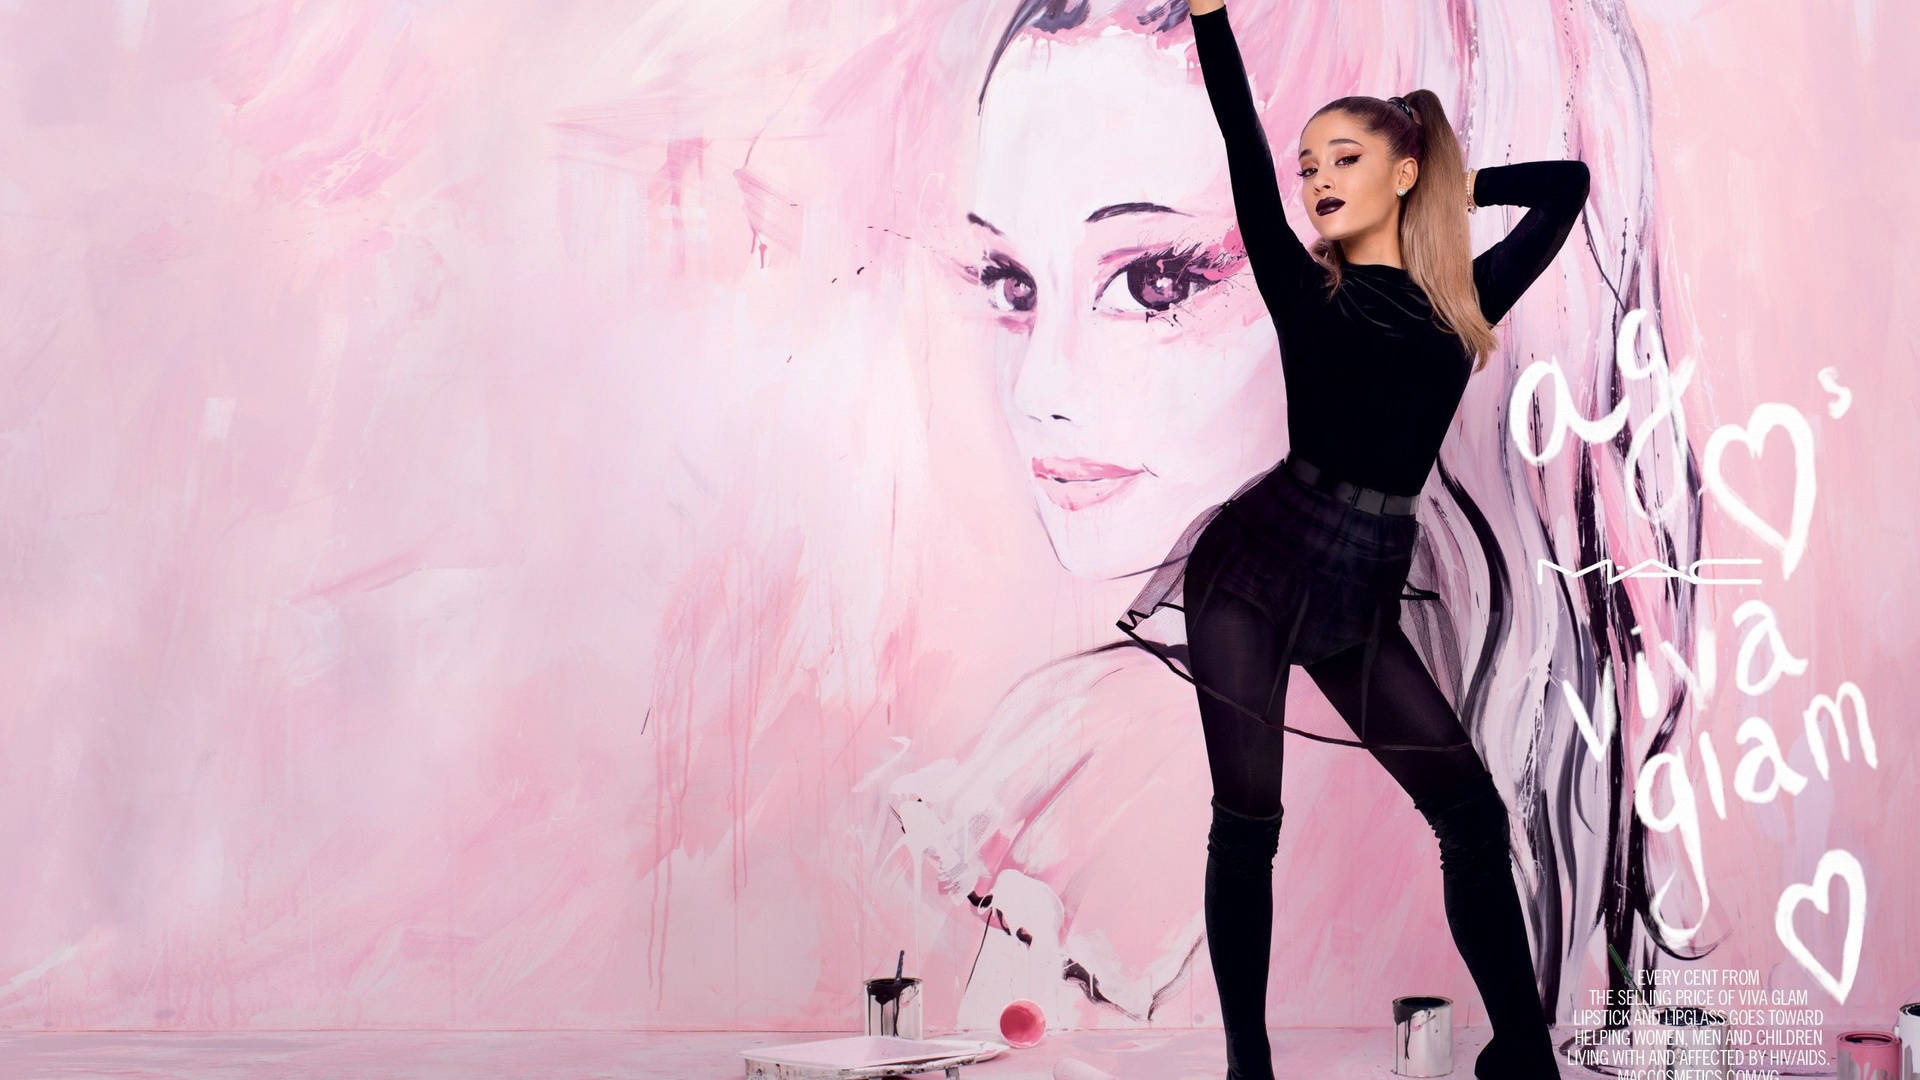 Ariana Grande slaying the stage Wallpaper